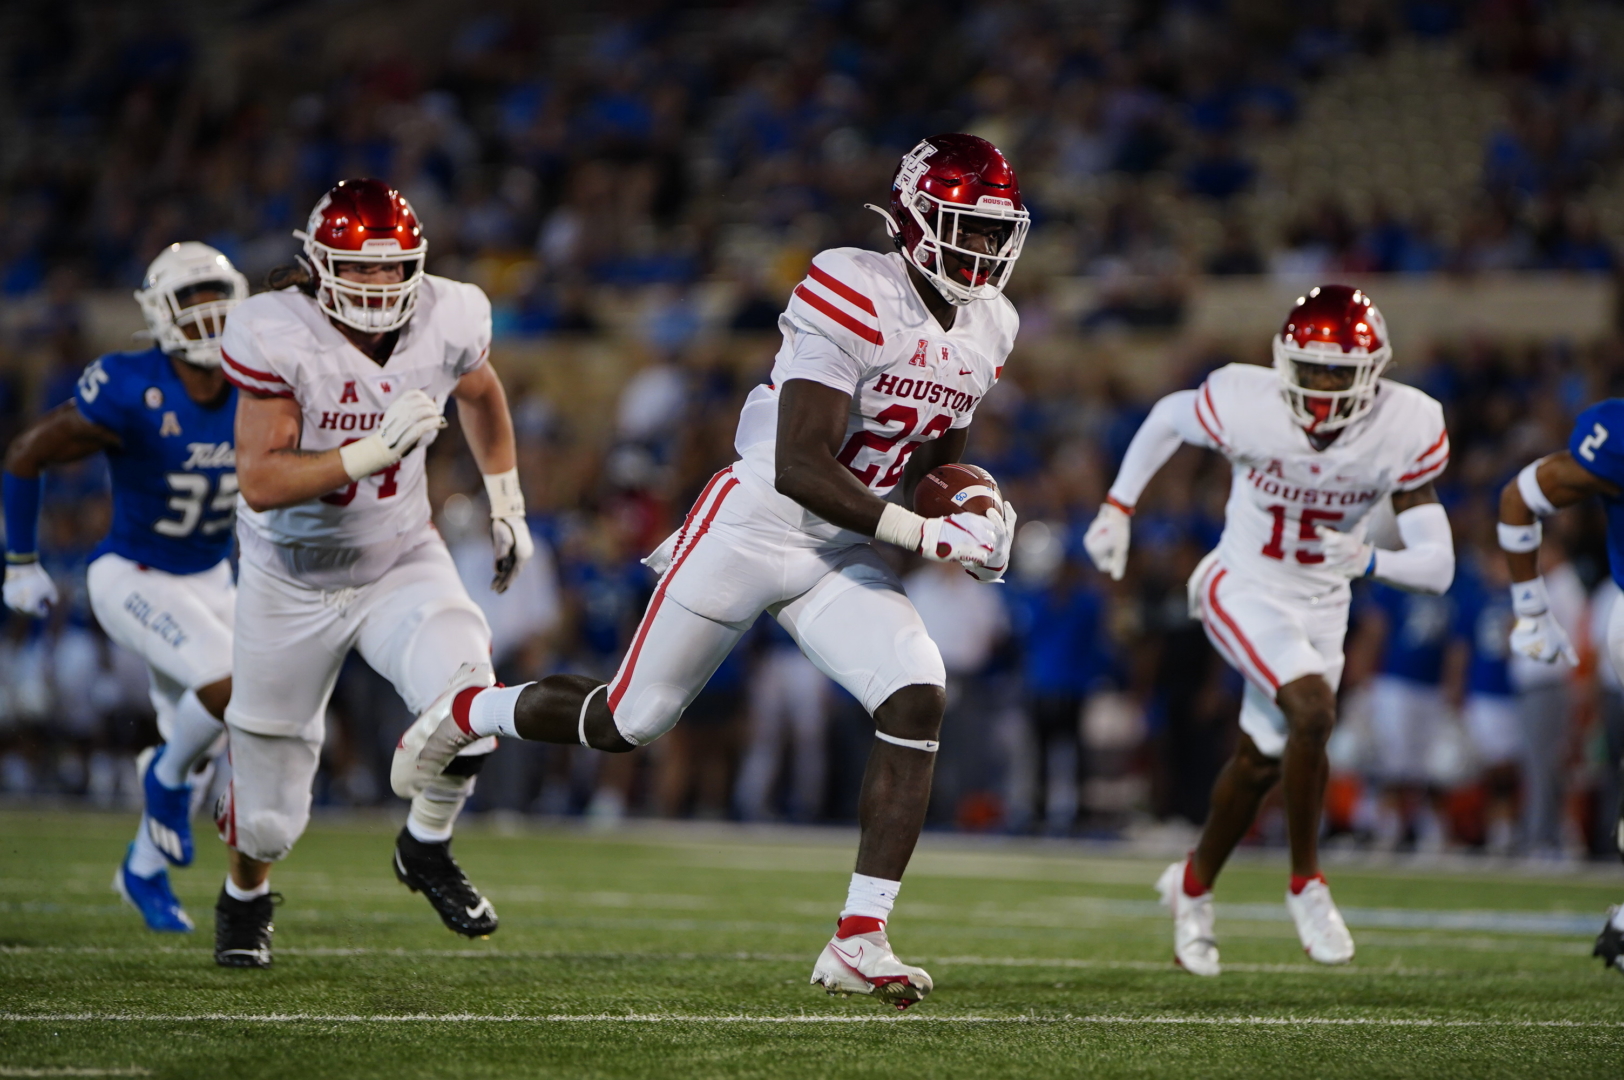 Freshman running back Alton McCaskill rushed for three first half touchdowns in UH's blowout win over Tulsa Friday night. | Courtesy of UH athletics